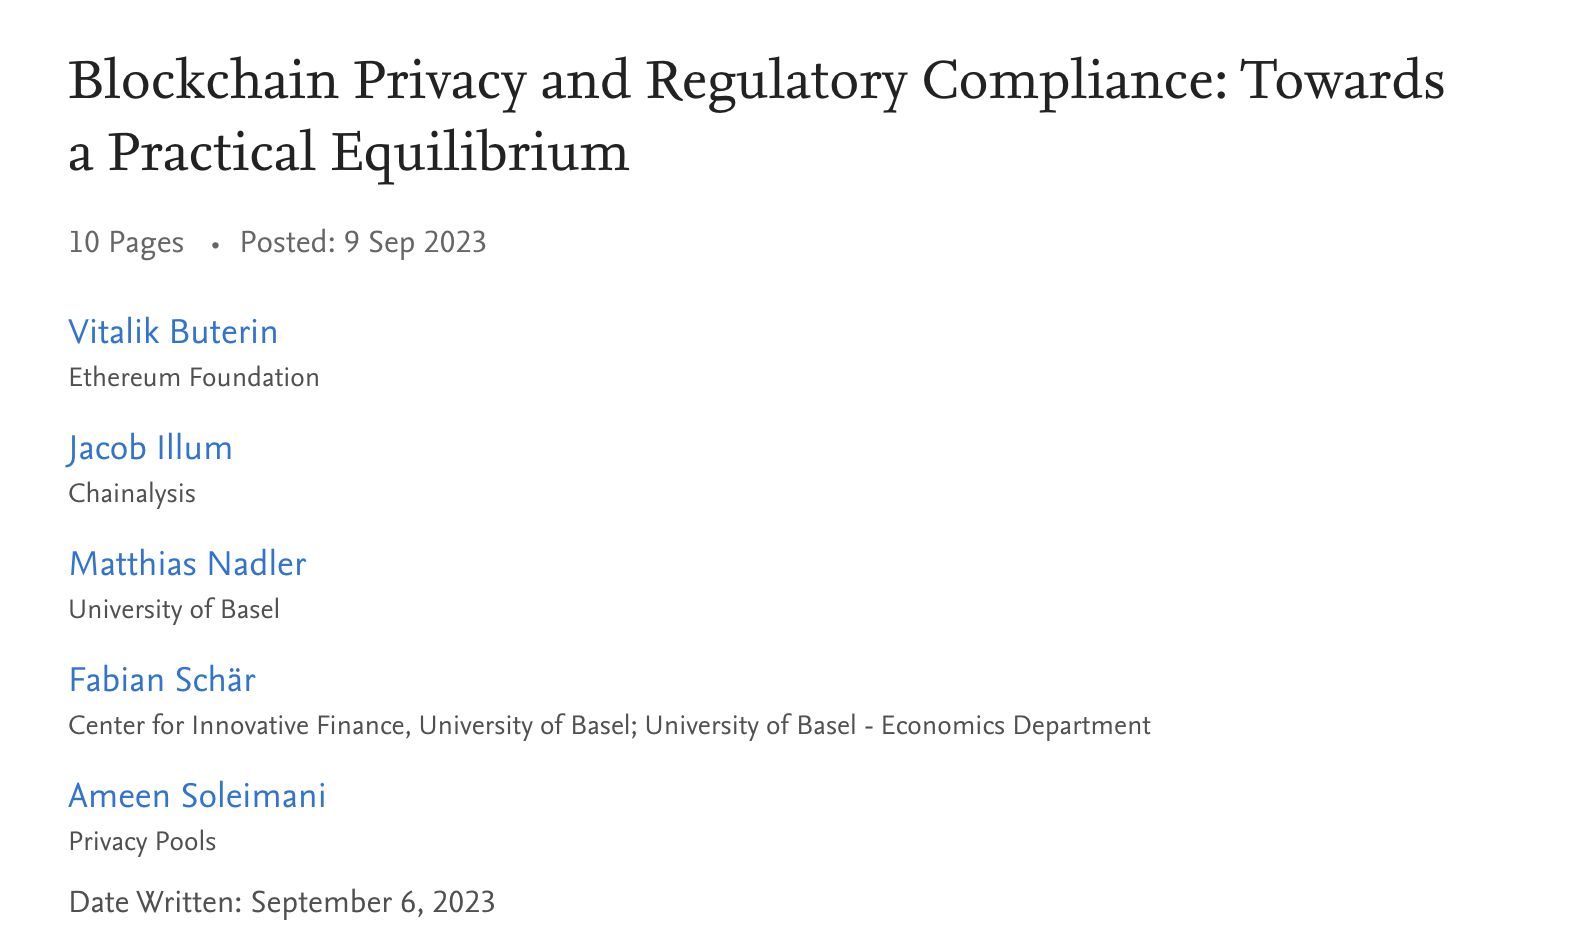 "Privacy Pools" paper was one of the most cited privacy-related papers in 2023 (at least, on Twitter/X & in the media)